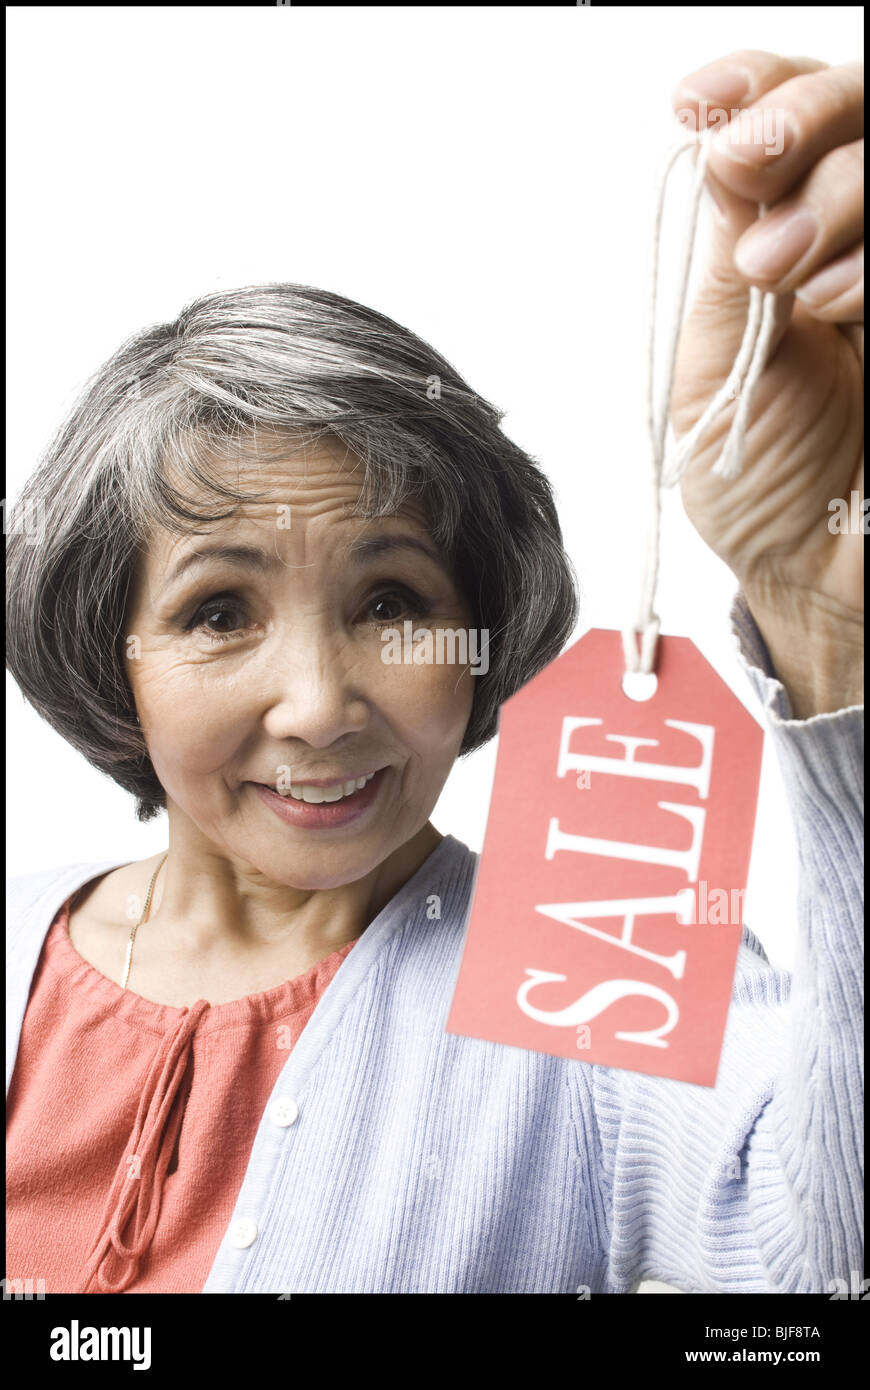 woman holding "sale" tag Stock Photo